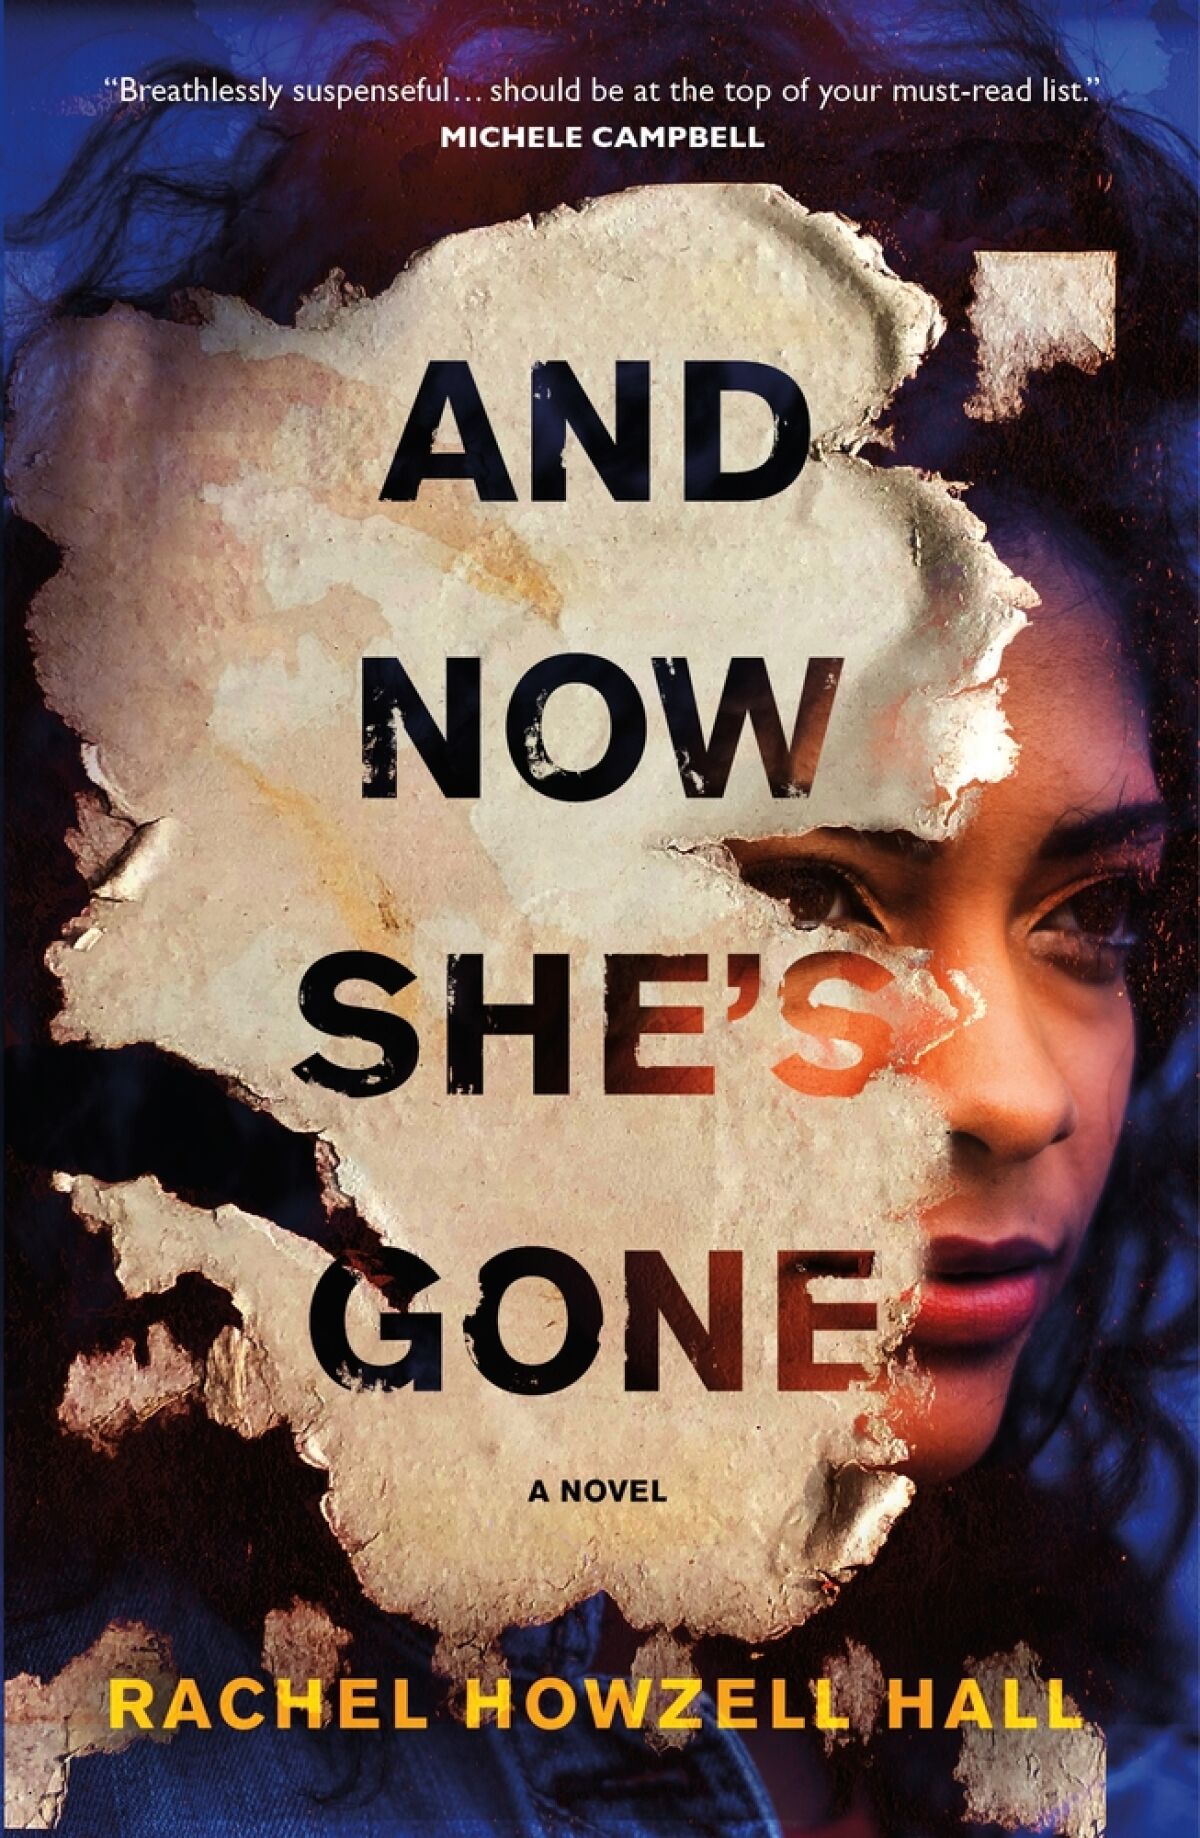 Book jacket for “And Now She's Gone” by Rachel Howzell Hall